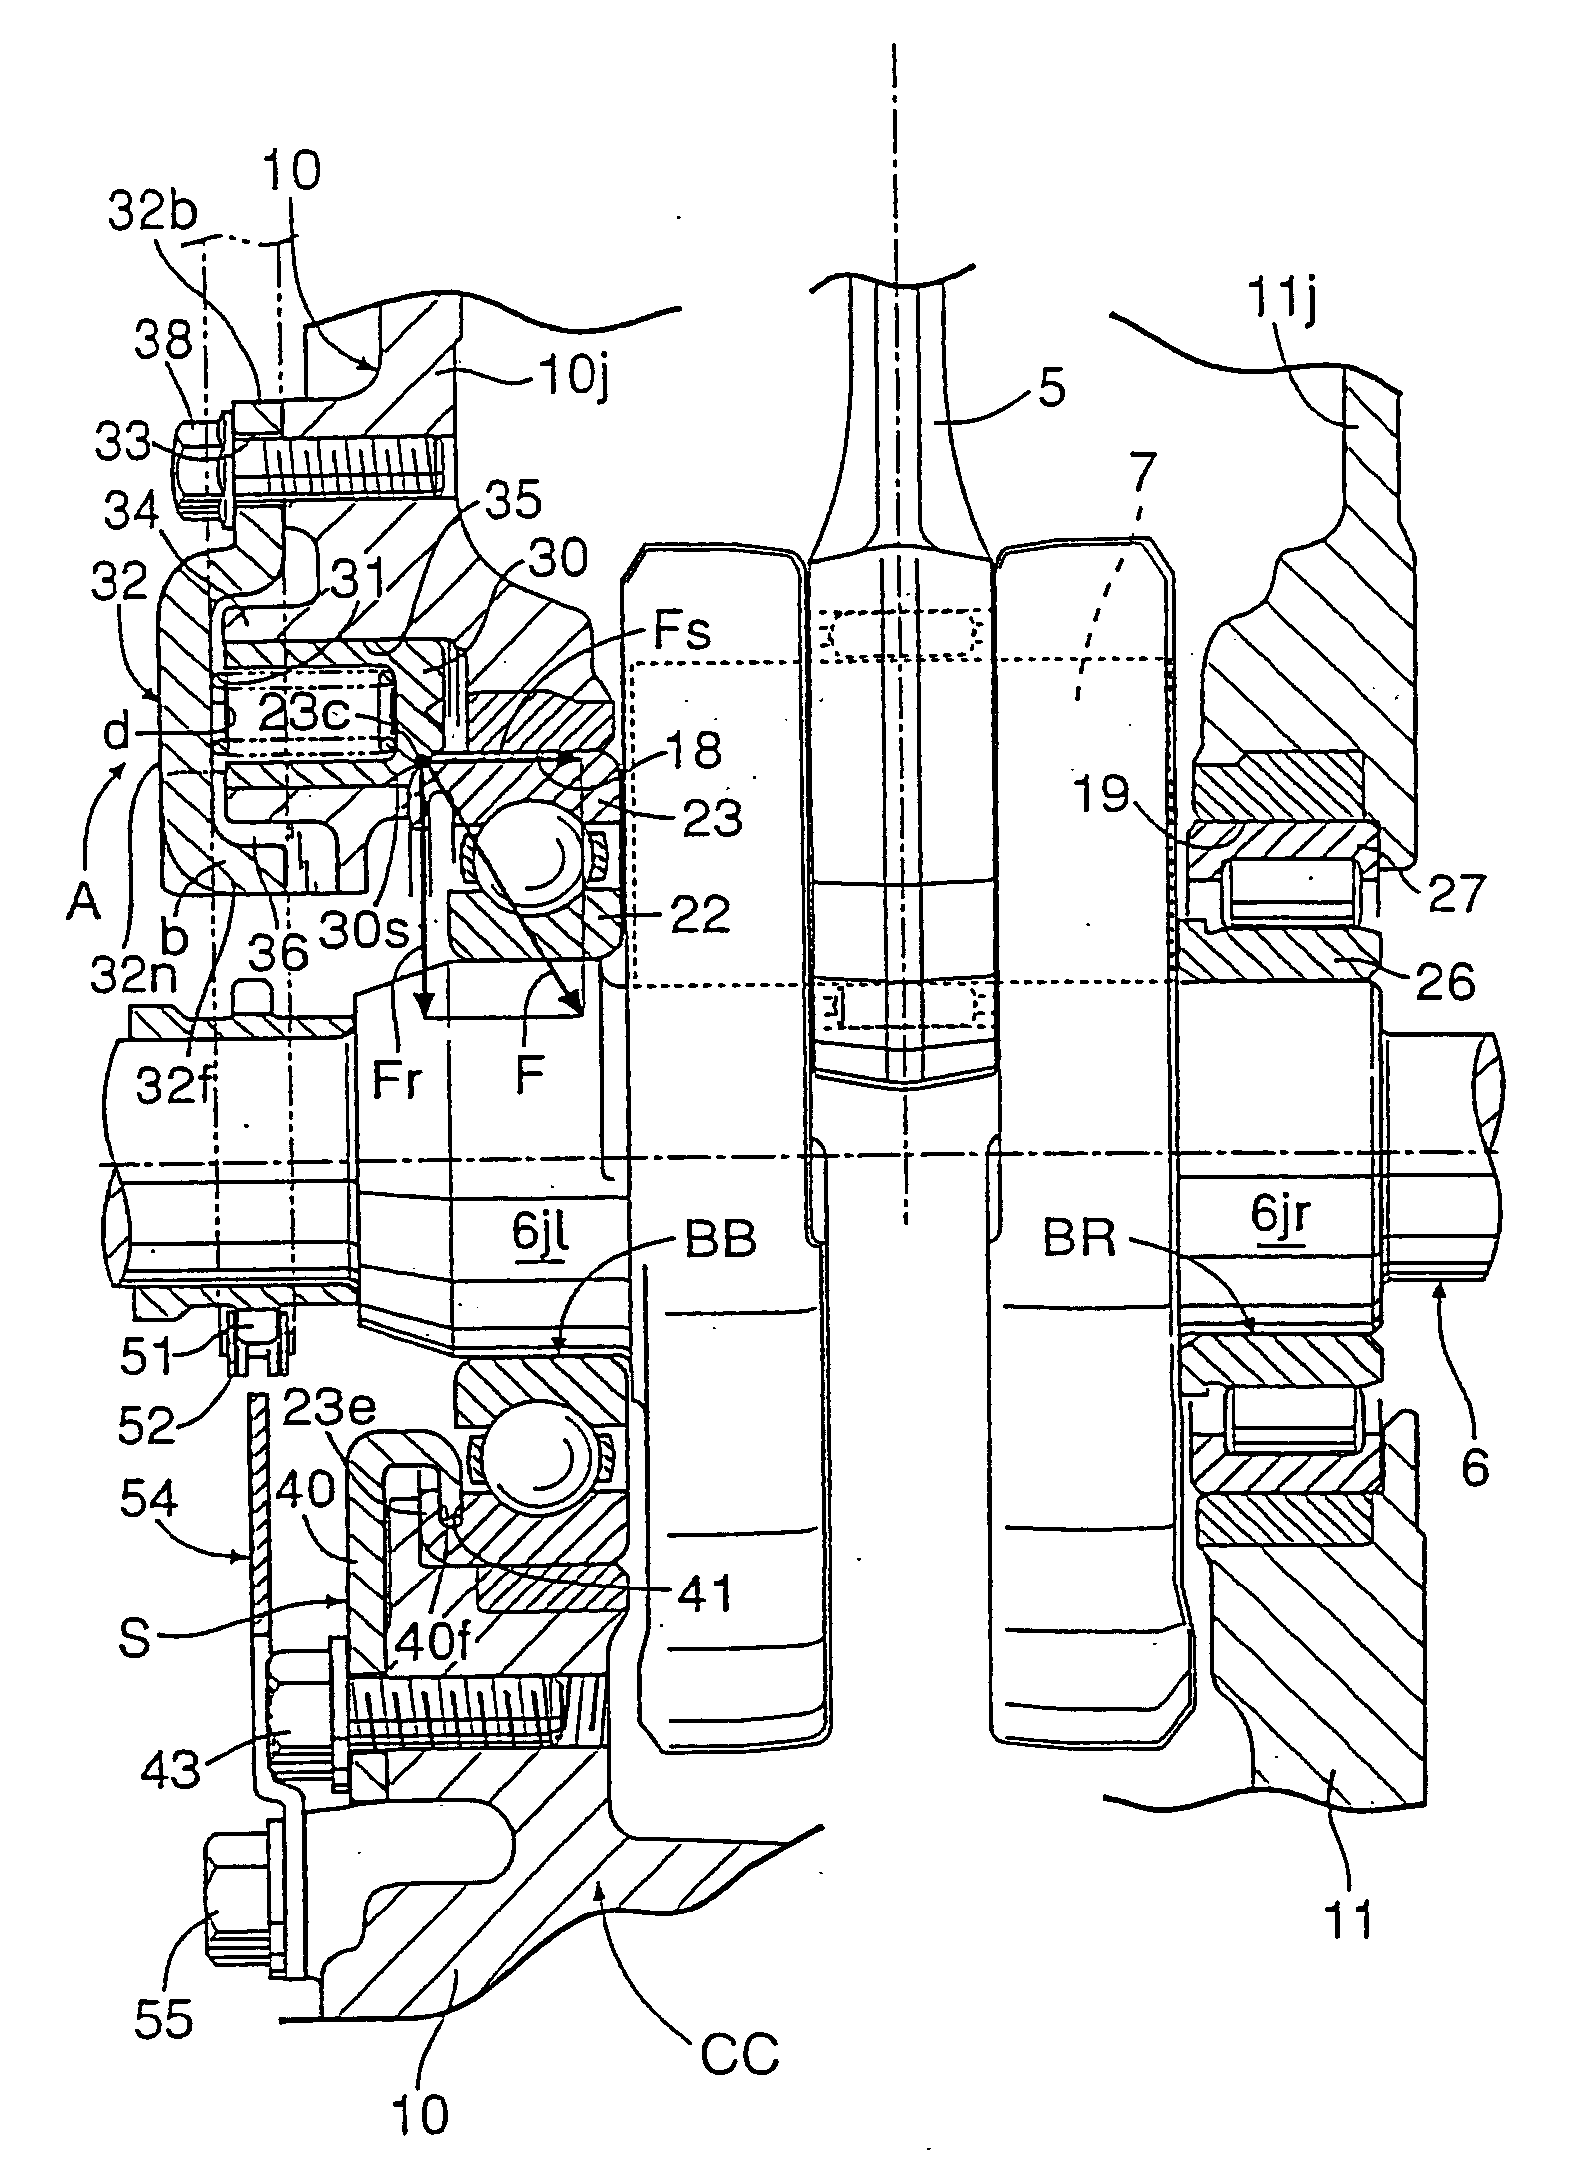 Bearing structure of crankshaft in internal combustion engine